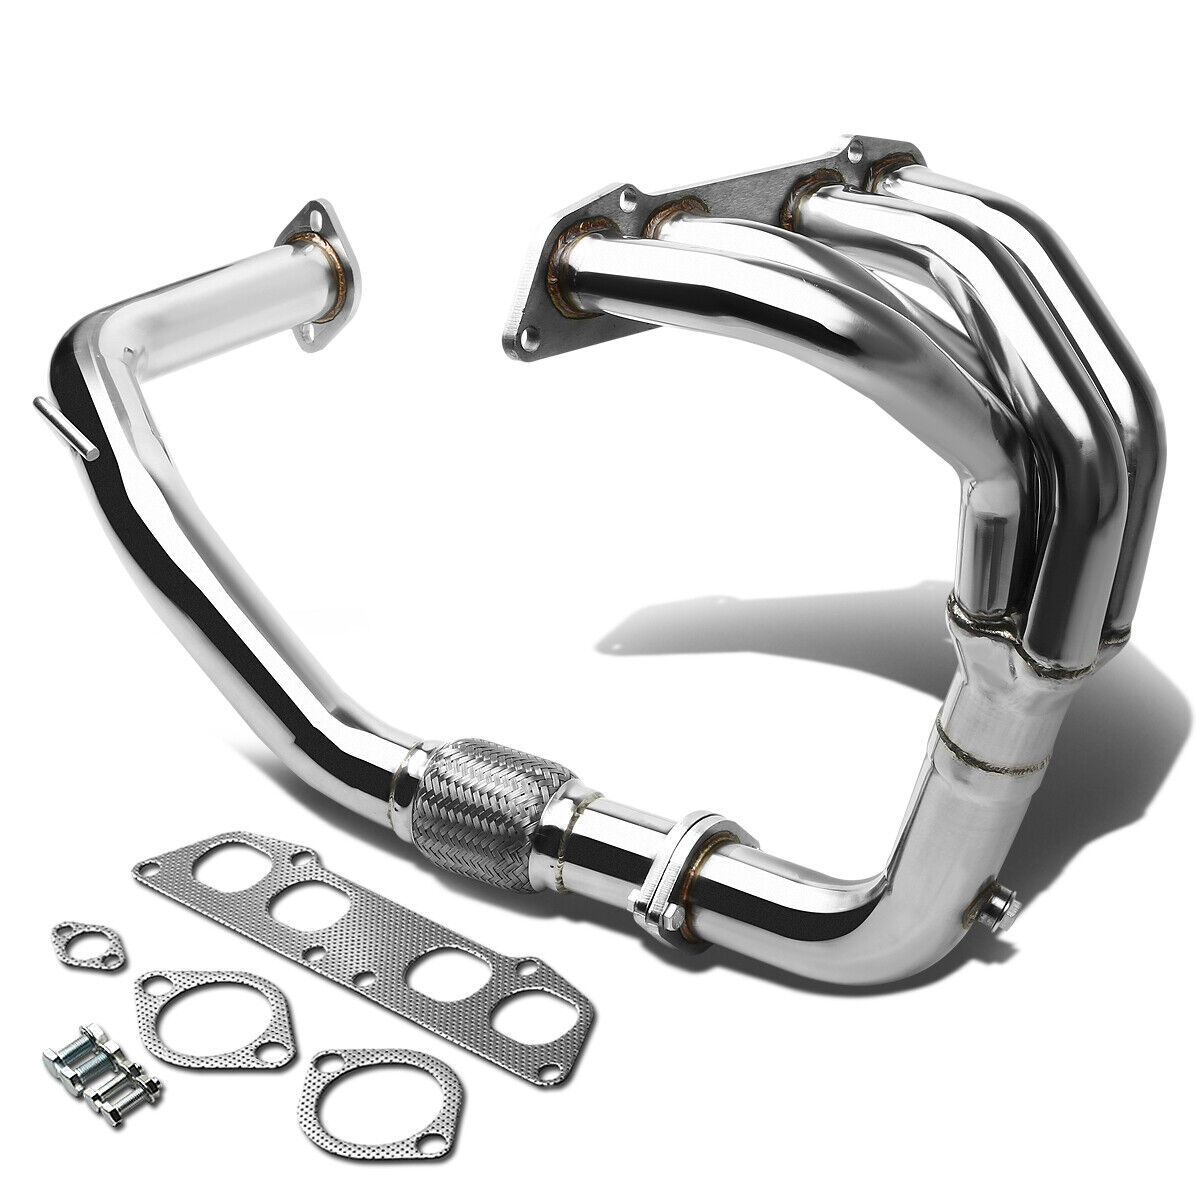 FOR TOYOTA MR2 SW20 2.2L NON TURBO STAINLESS EXHAUST CHROME HEADER+GASKET+O2